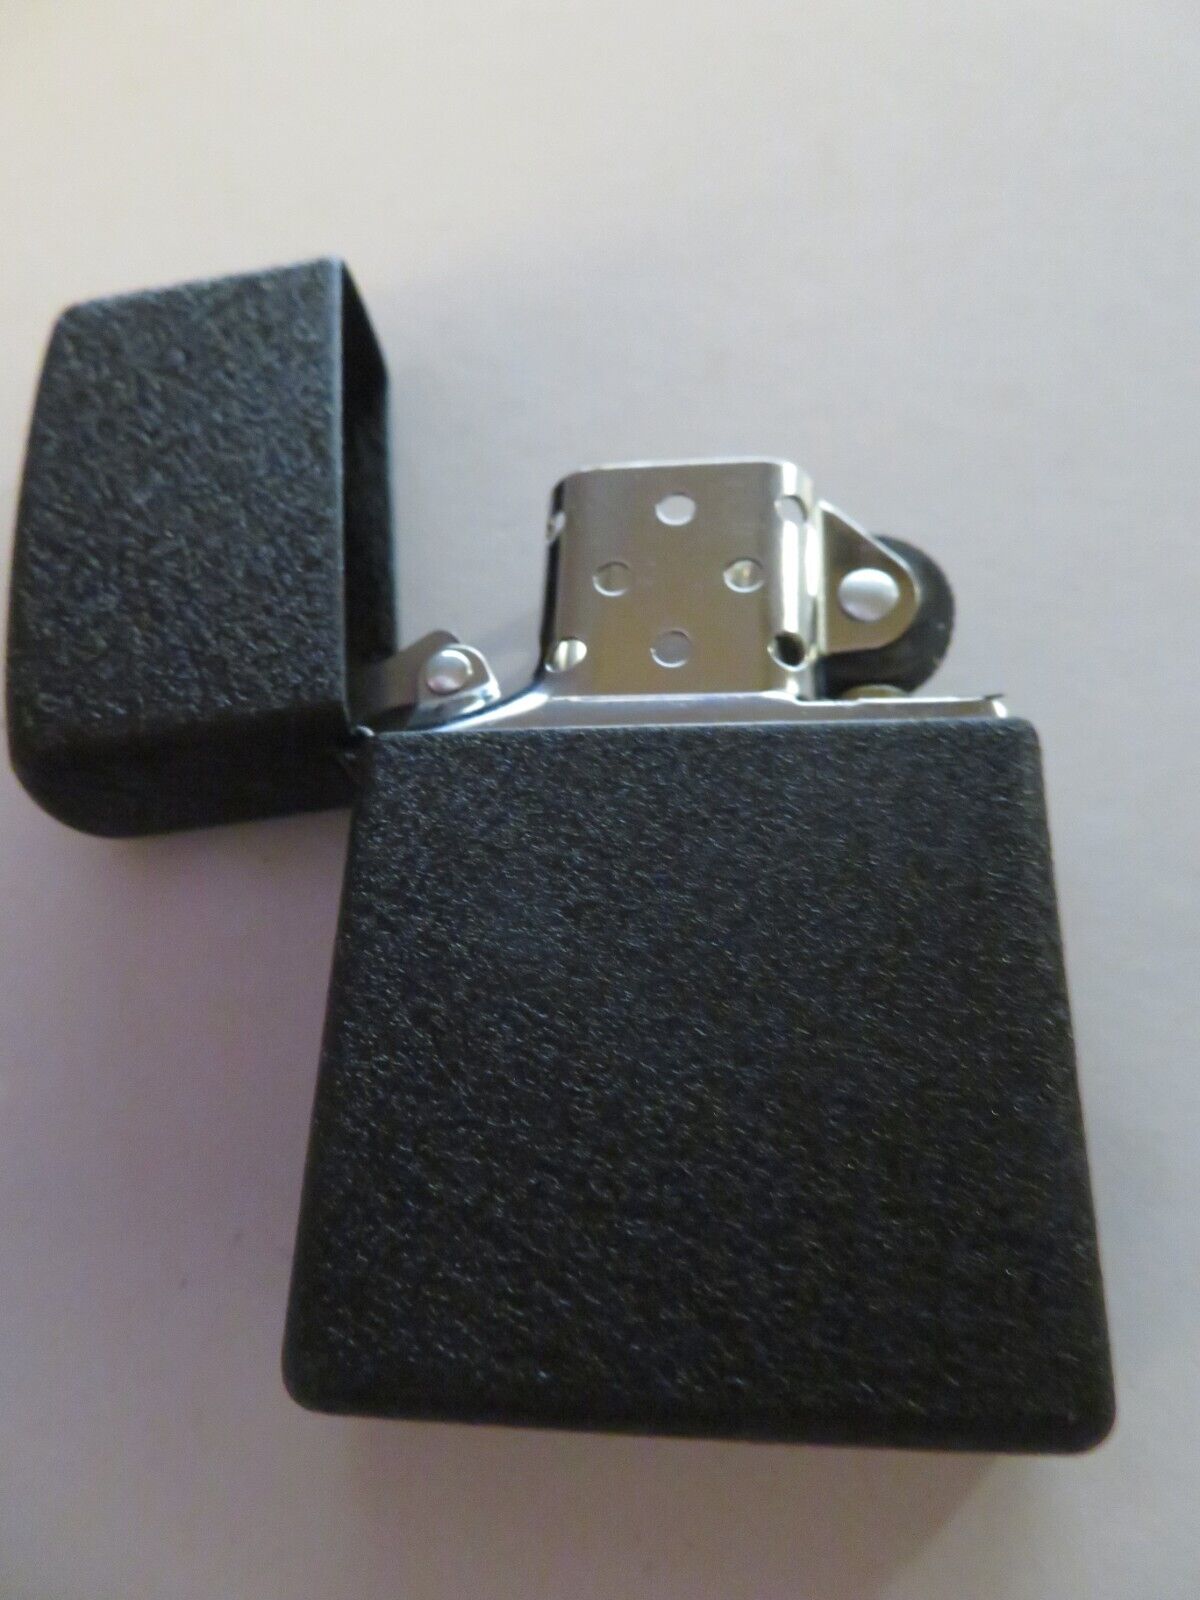 ZIPPO LIGHTER   NEW   CLASSIC BLACK CRACKLE   NO BOX   LIGHTER ONLY   236